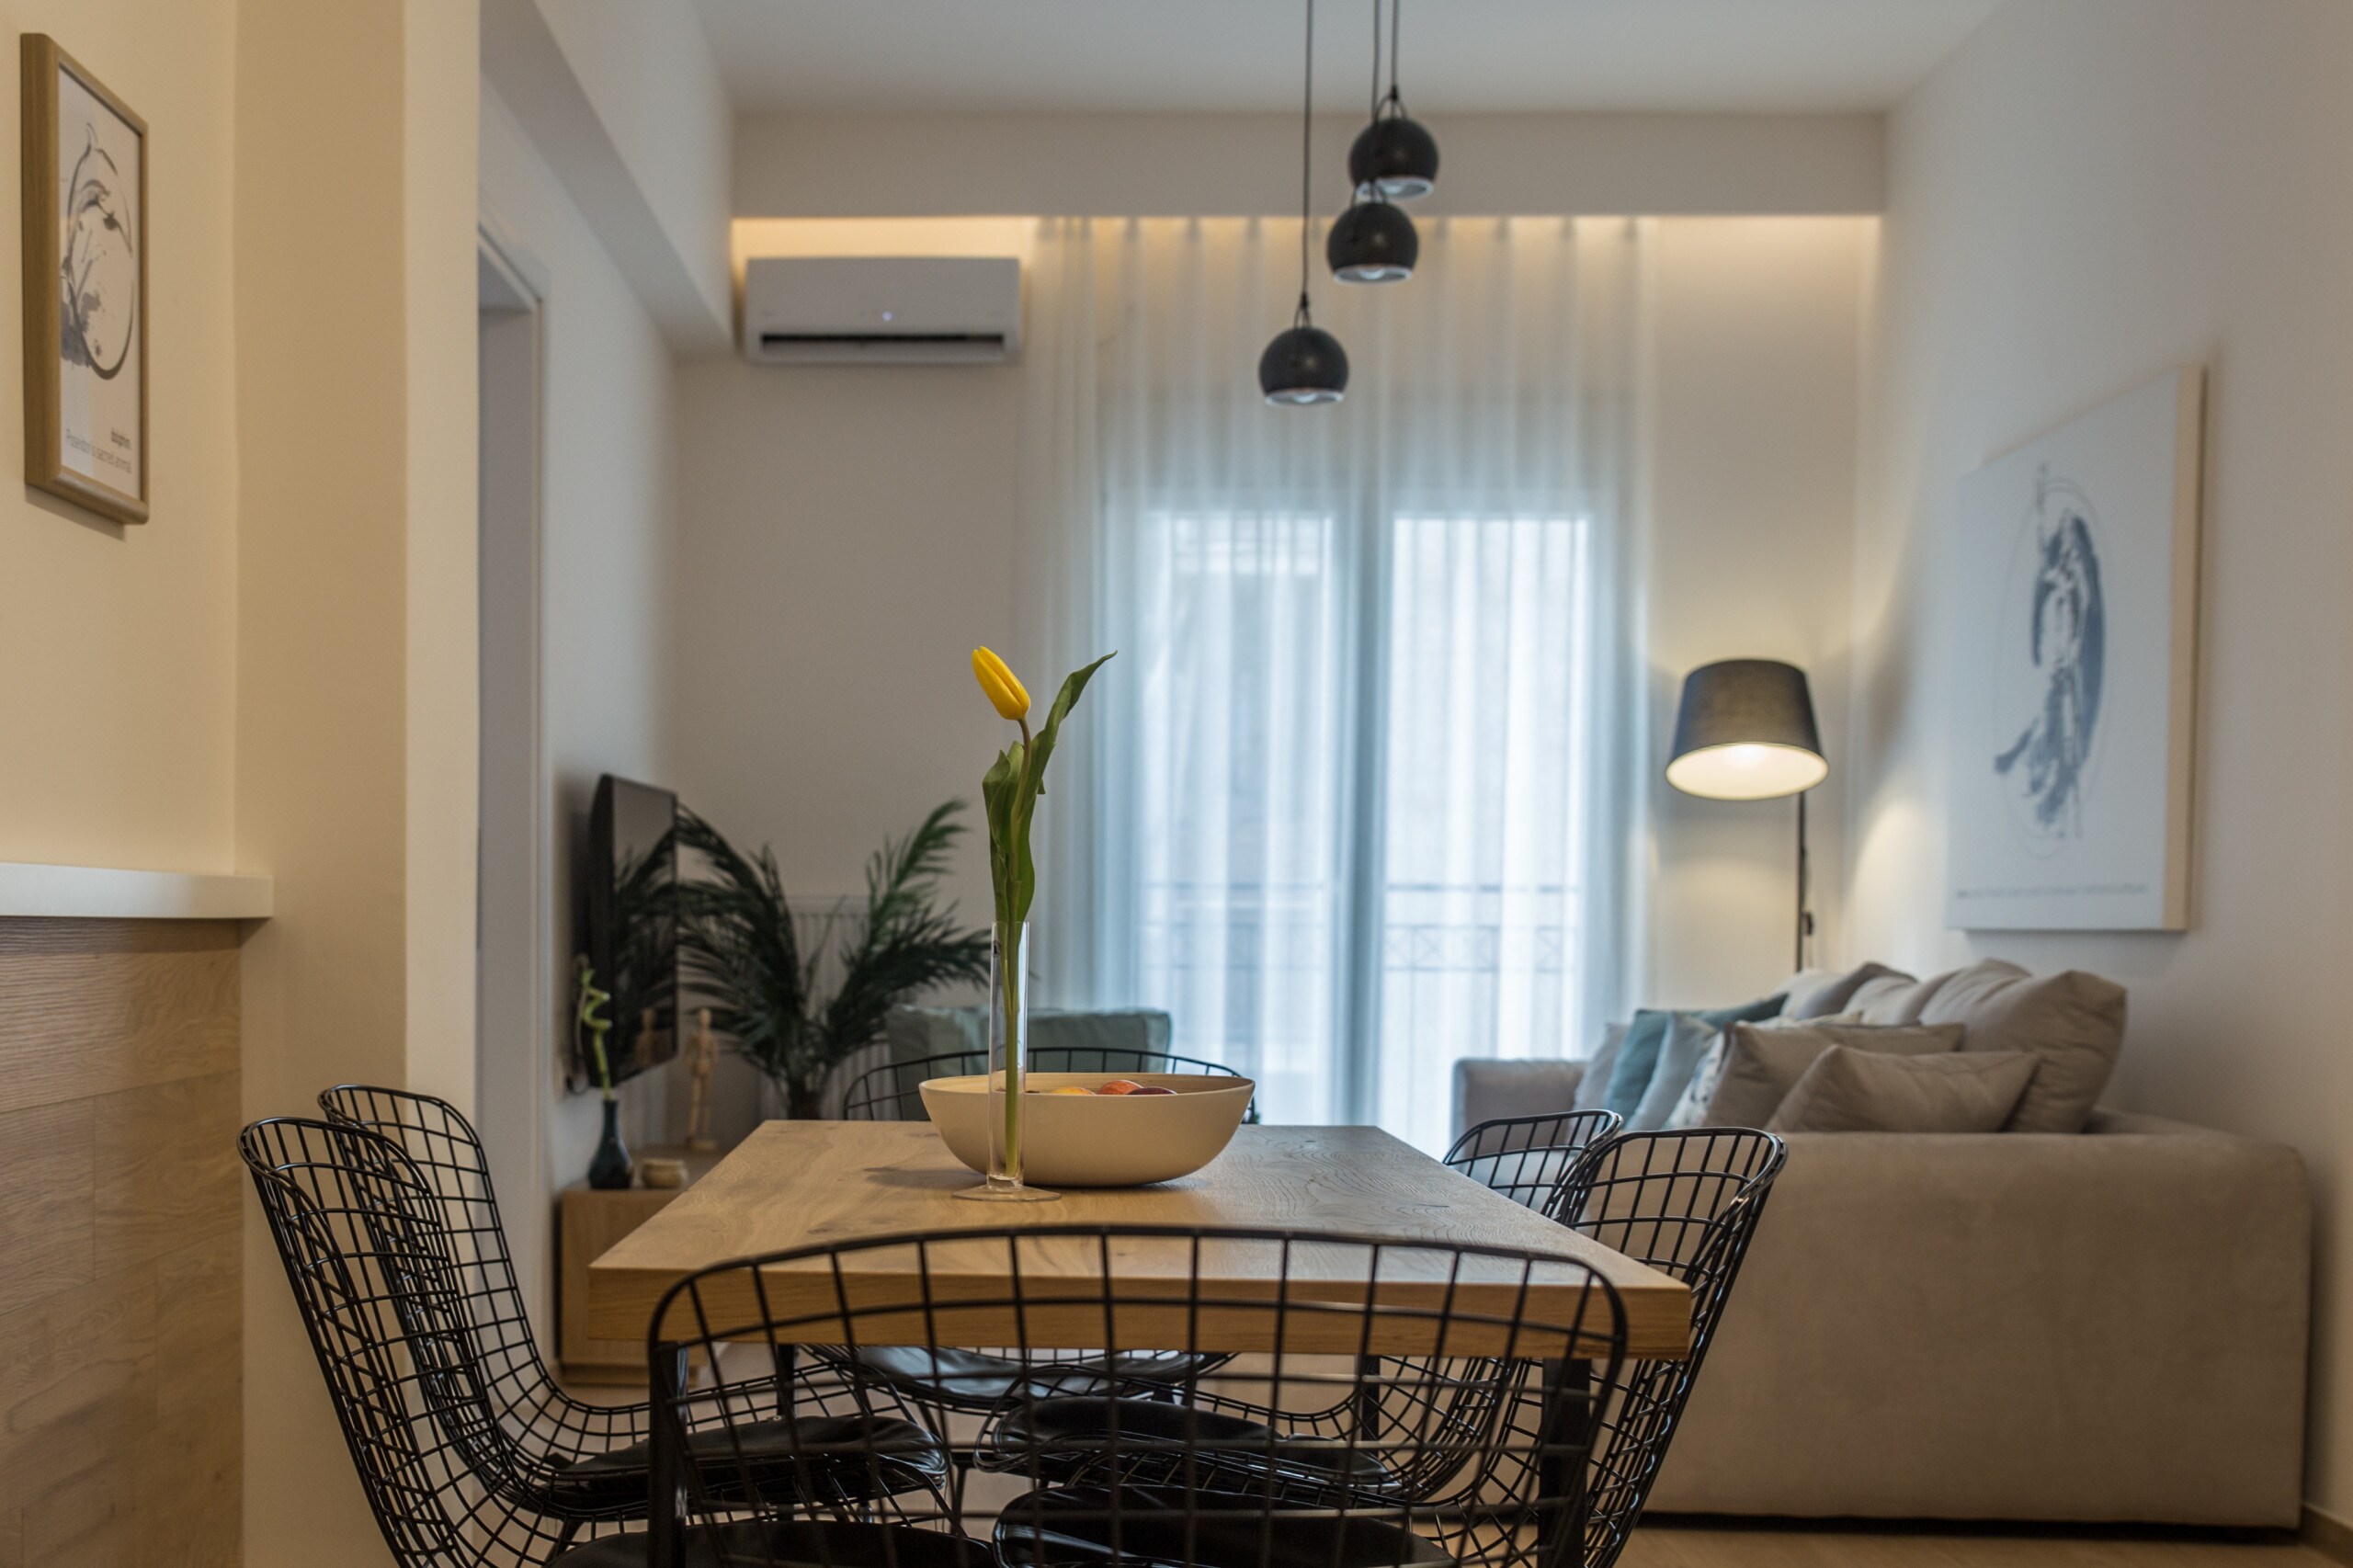 

A fully renovated apartment in the heart of Athens, with three bedrooms, a living area with a seating and a dining area, a full kitchen and two luxurious bathrooms with cabin shower.The dining area is open to the seating area and the kitchen.